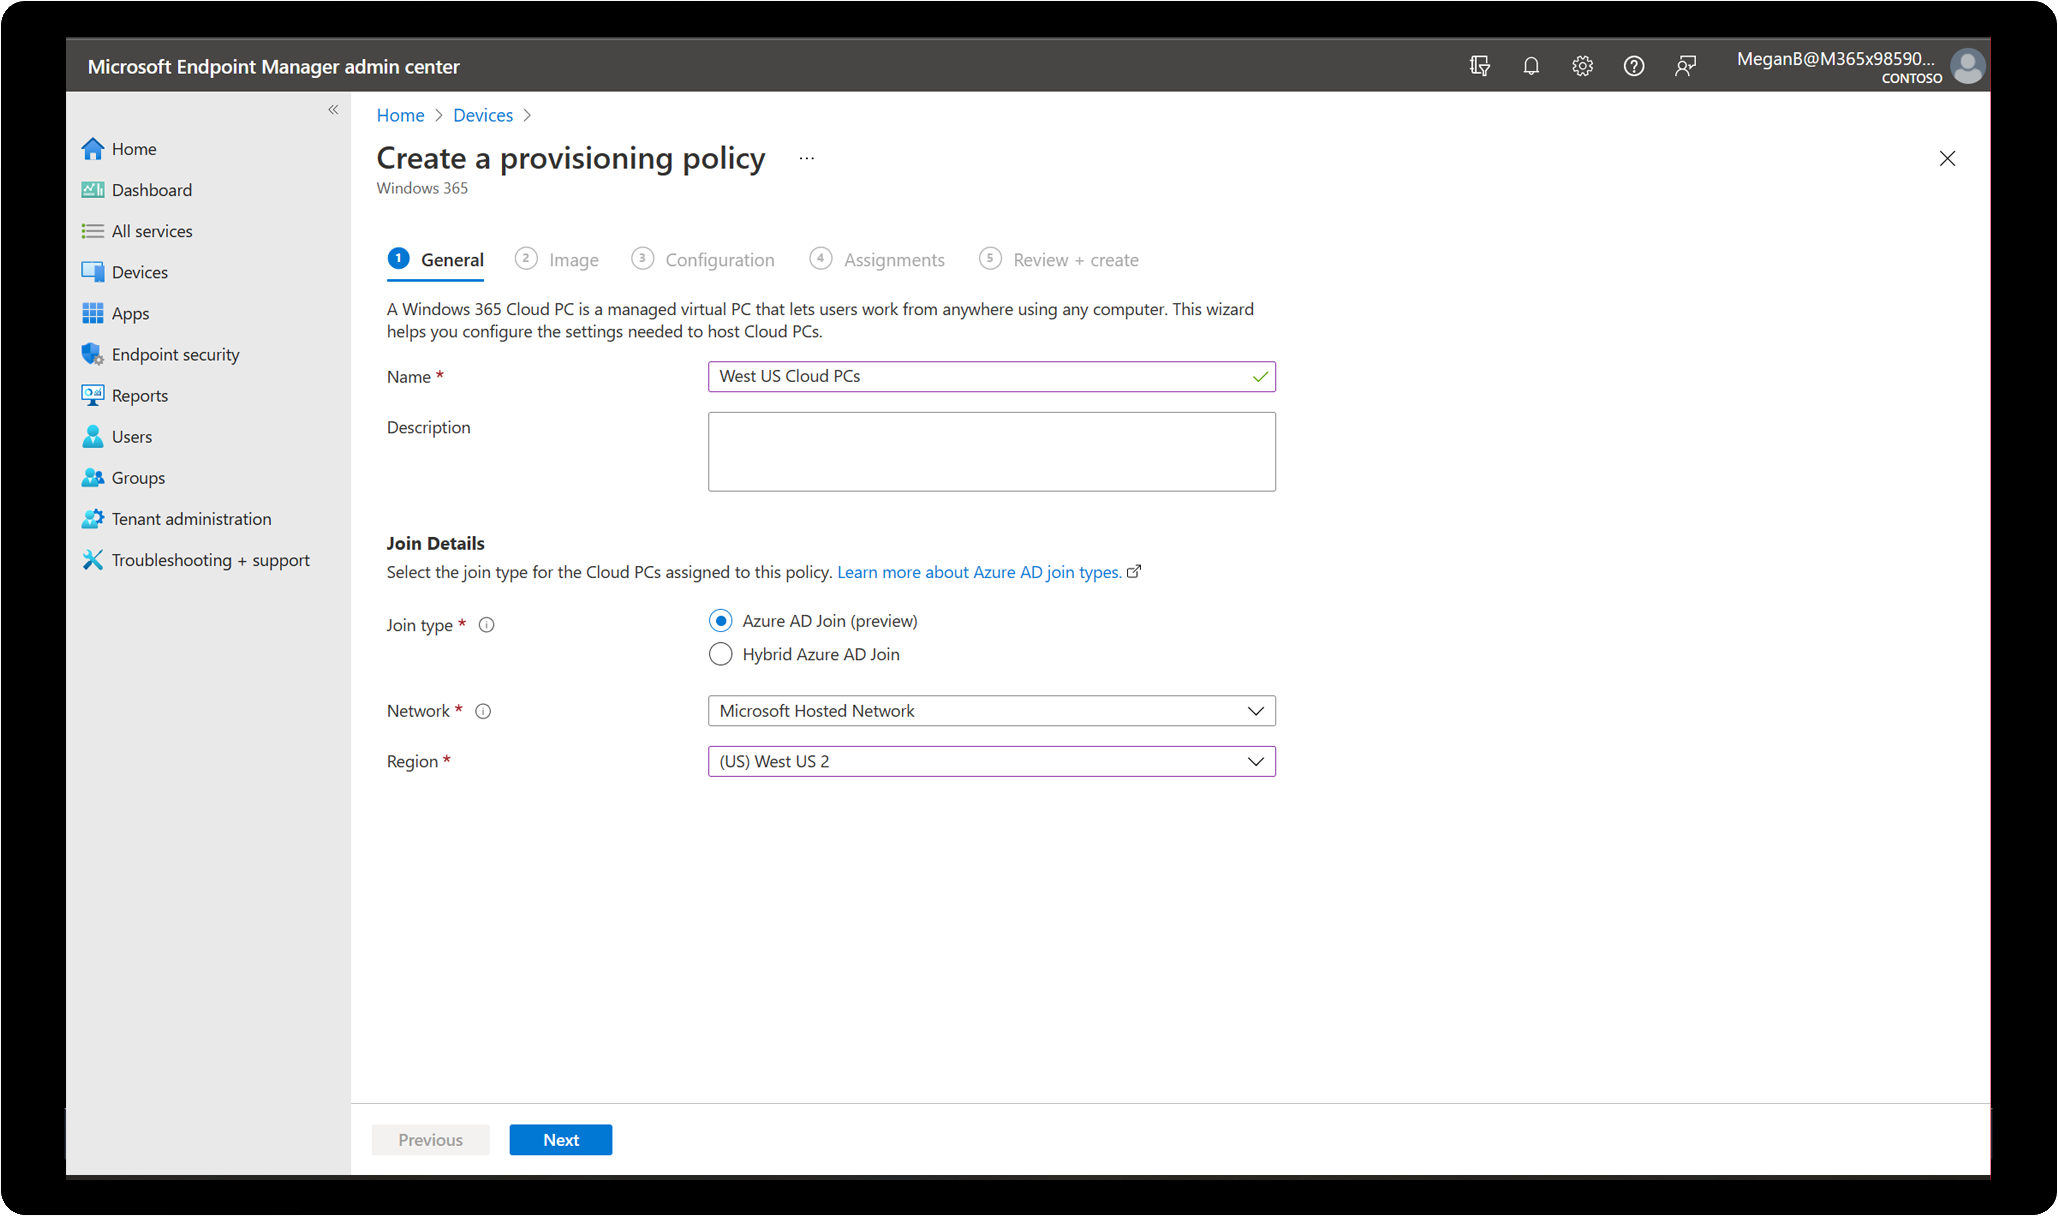 Microsoft Endpoint Manager admin center showing the wizard used to configure settings needed to host Cloud P Cs.